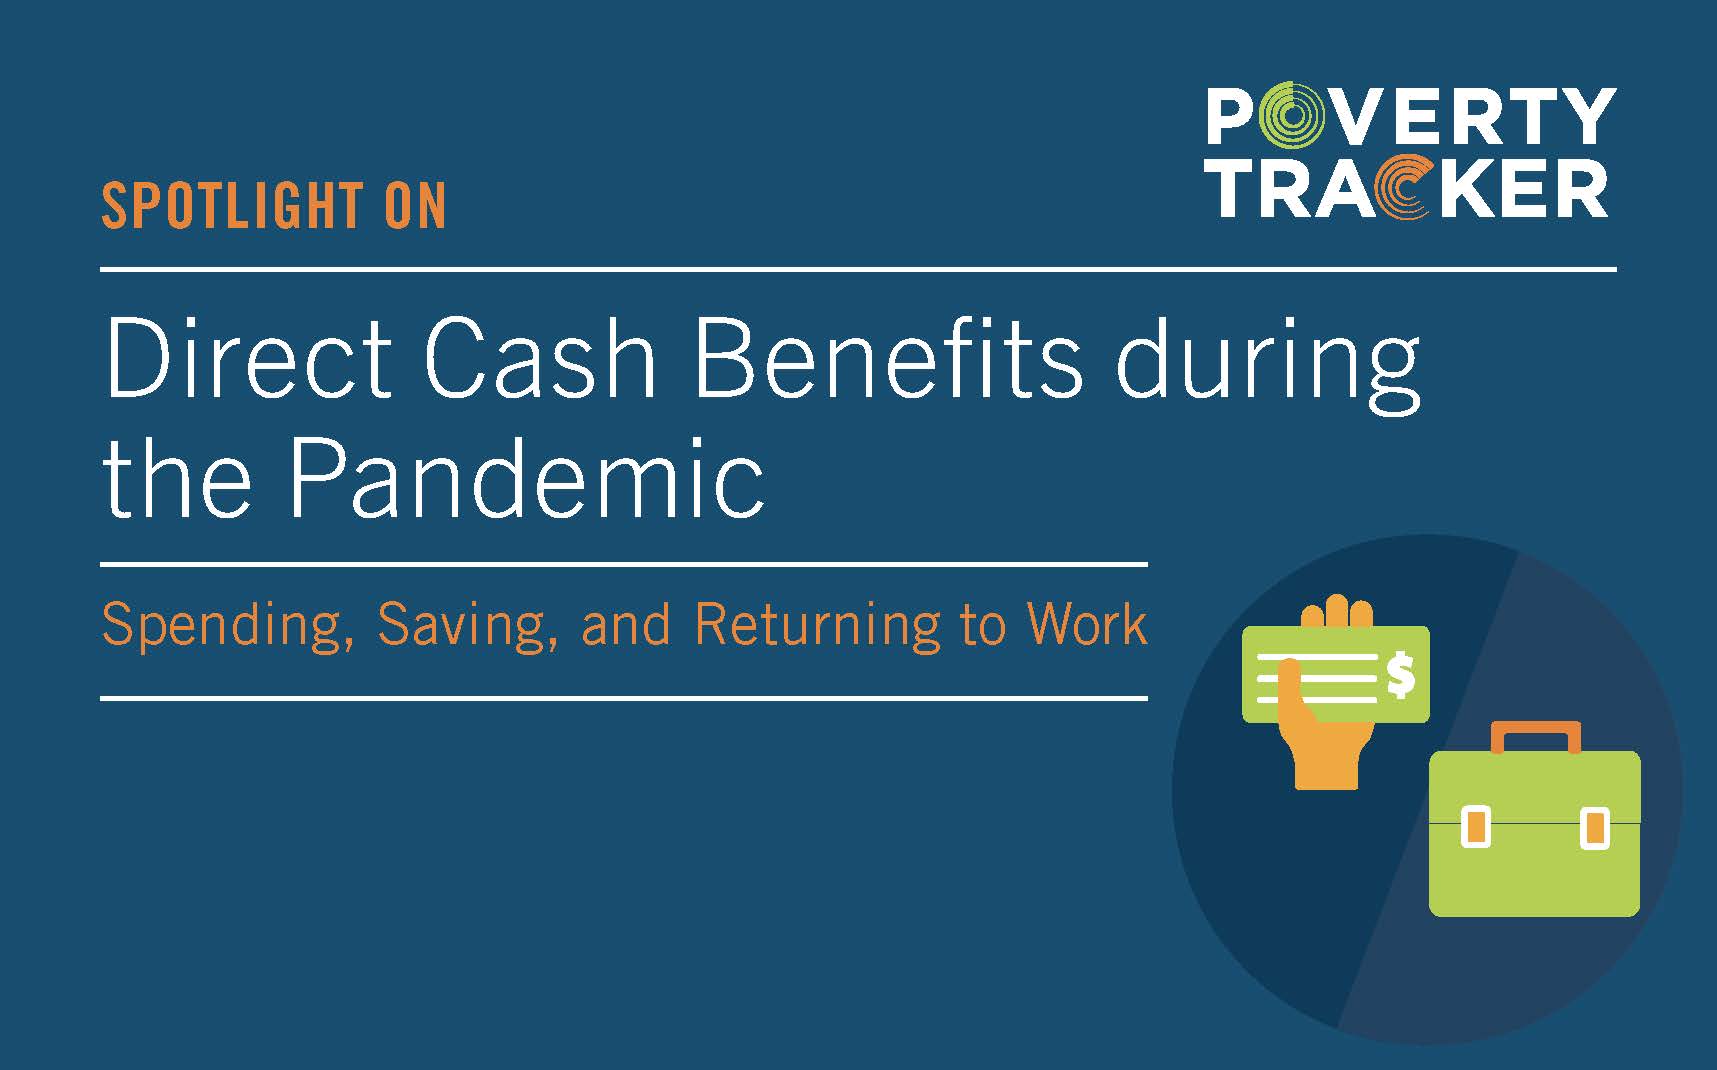 New Robin Hood Report Finds Direct Cash Assistance Acted as a Lifeline for Millions of New Yorkers During Pandemic